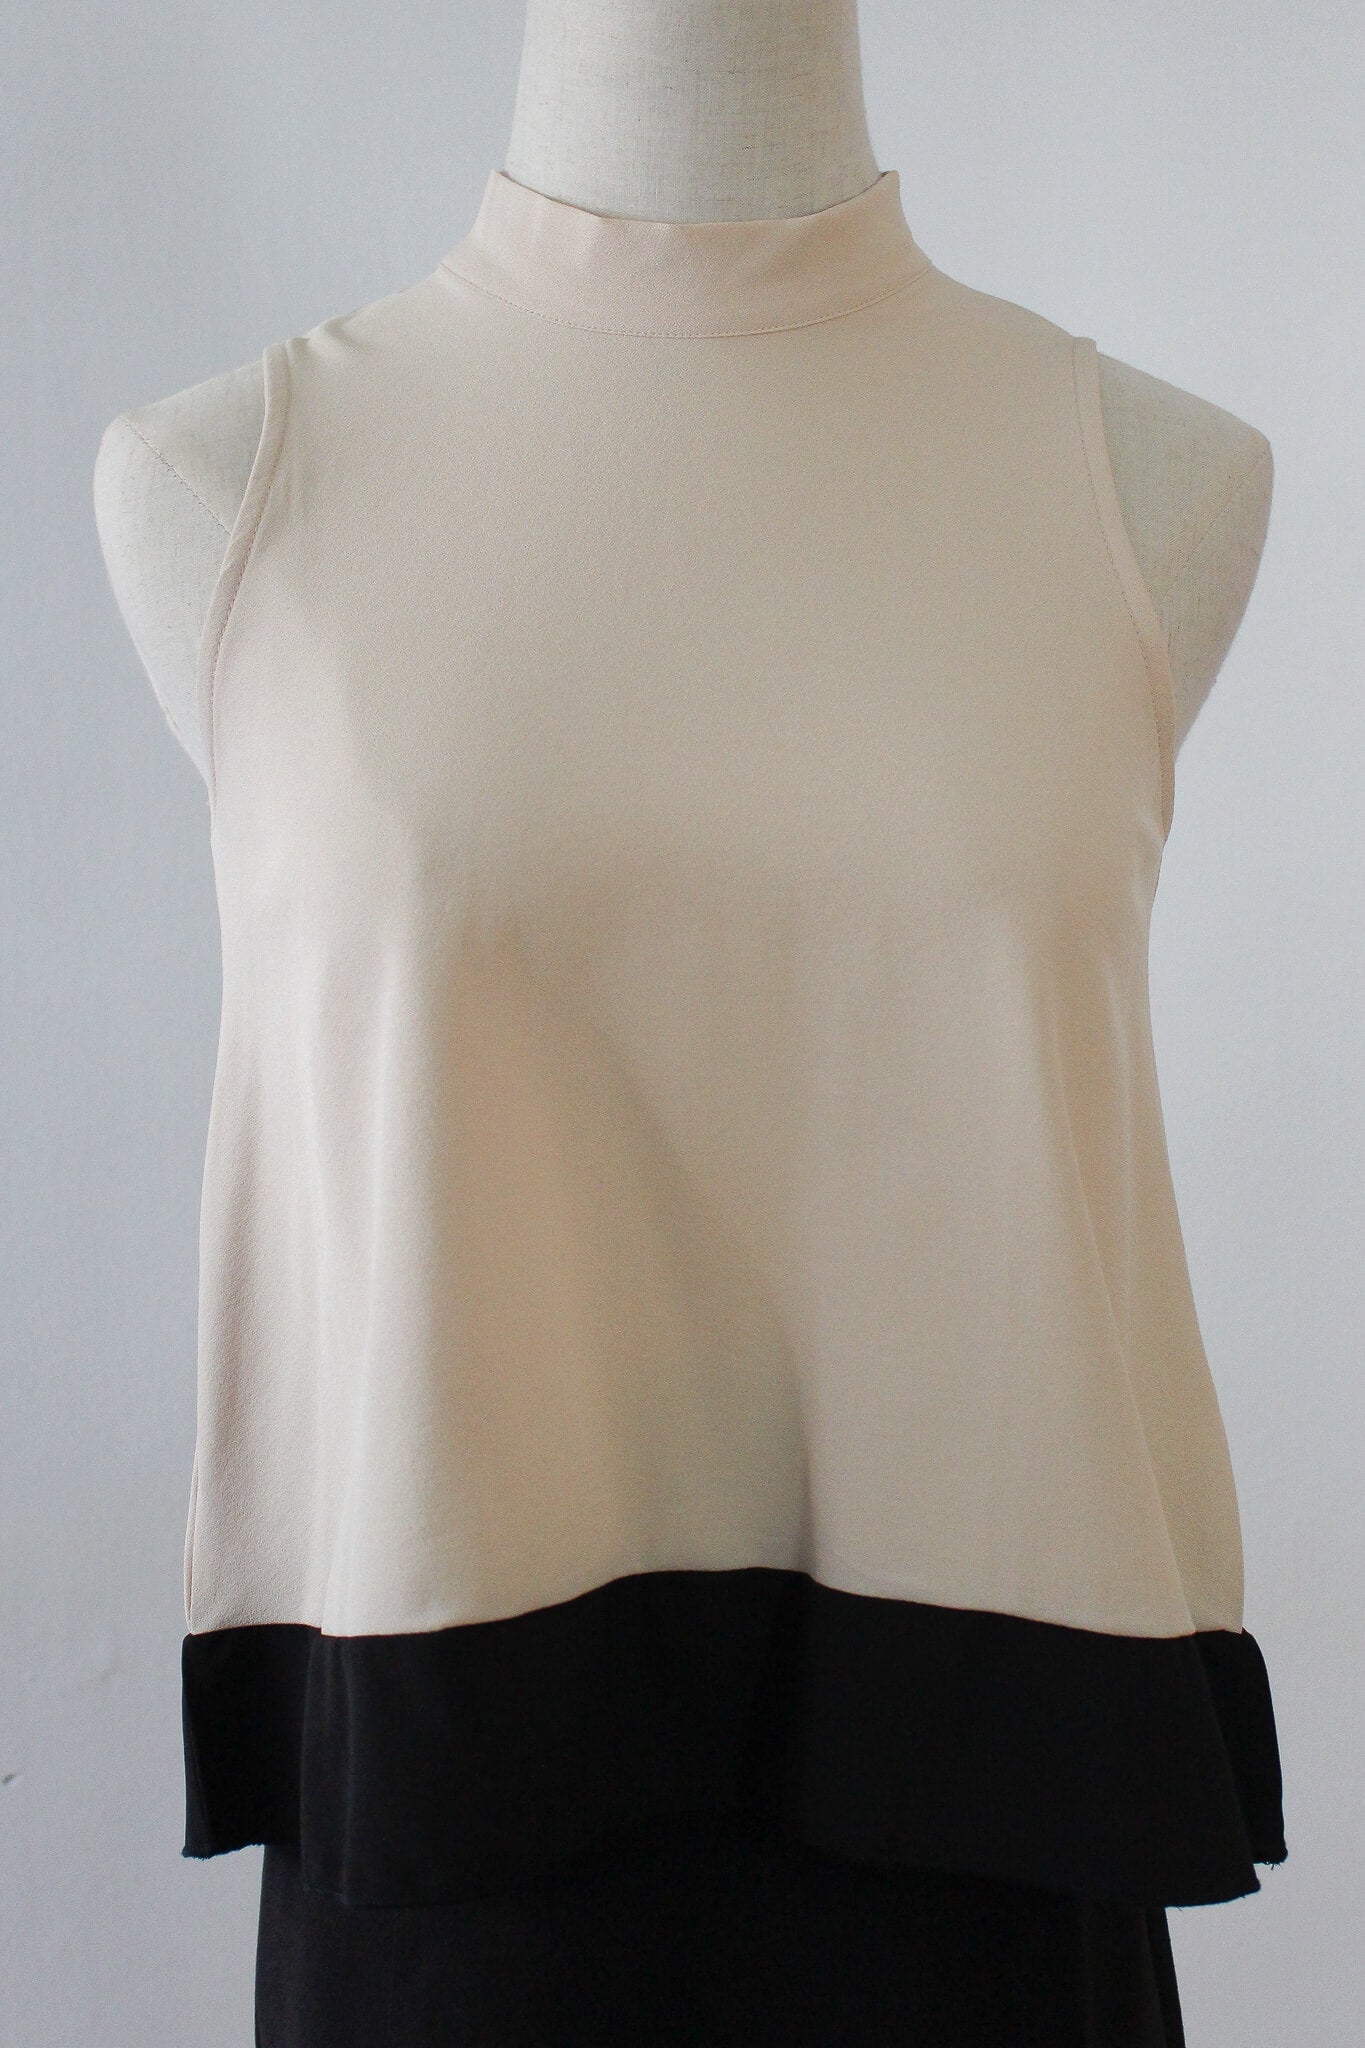 Turtle neck blouse for work wear